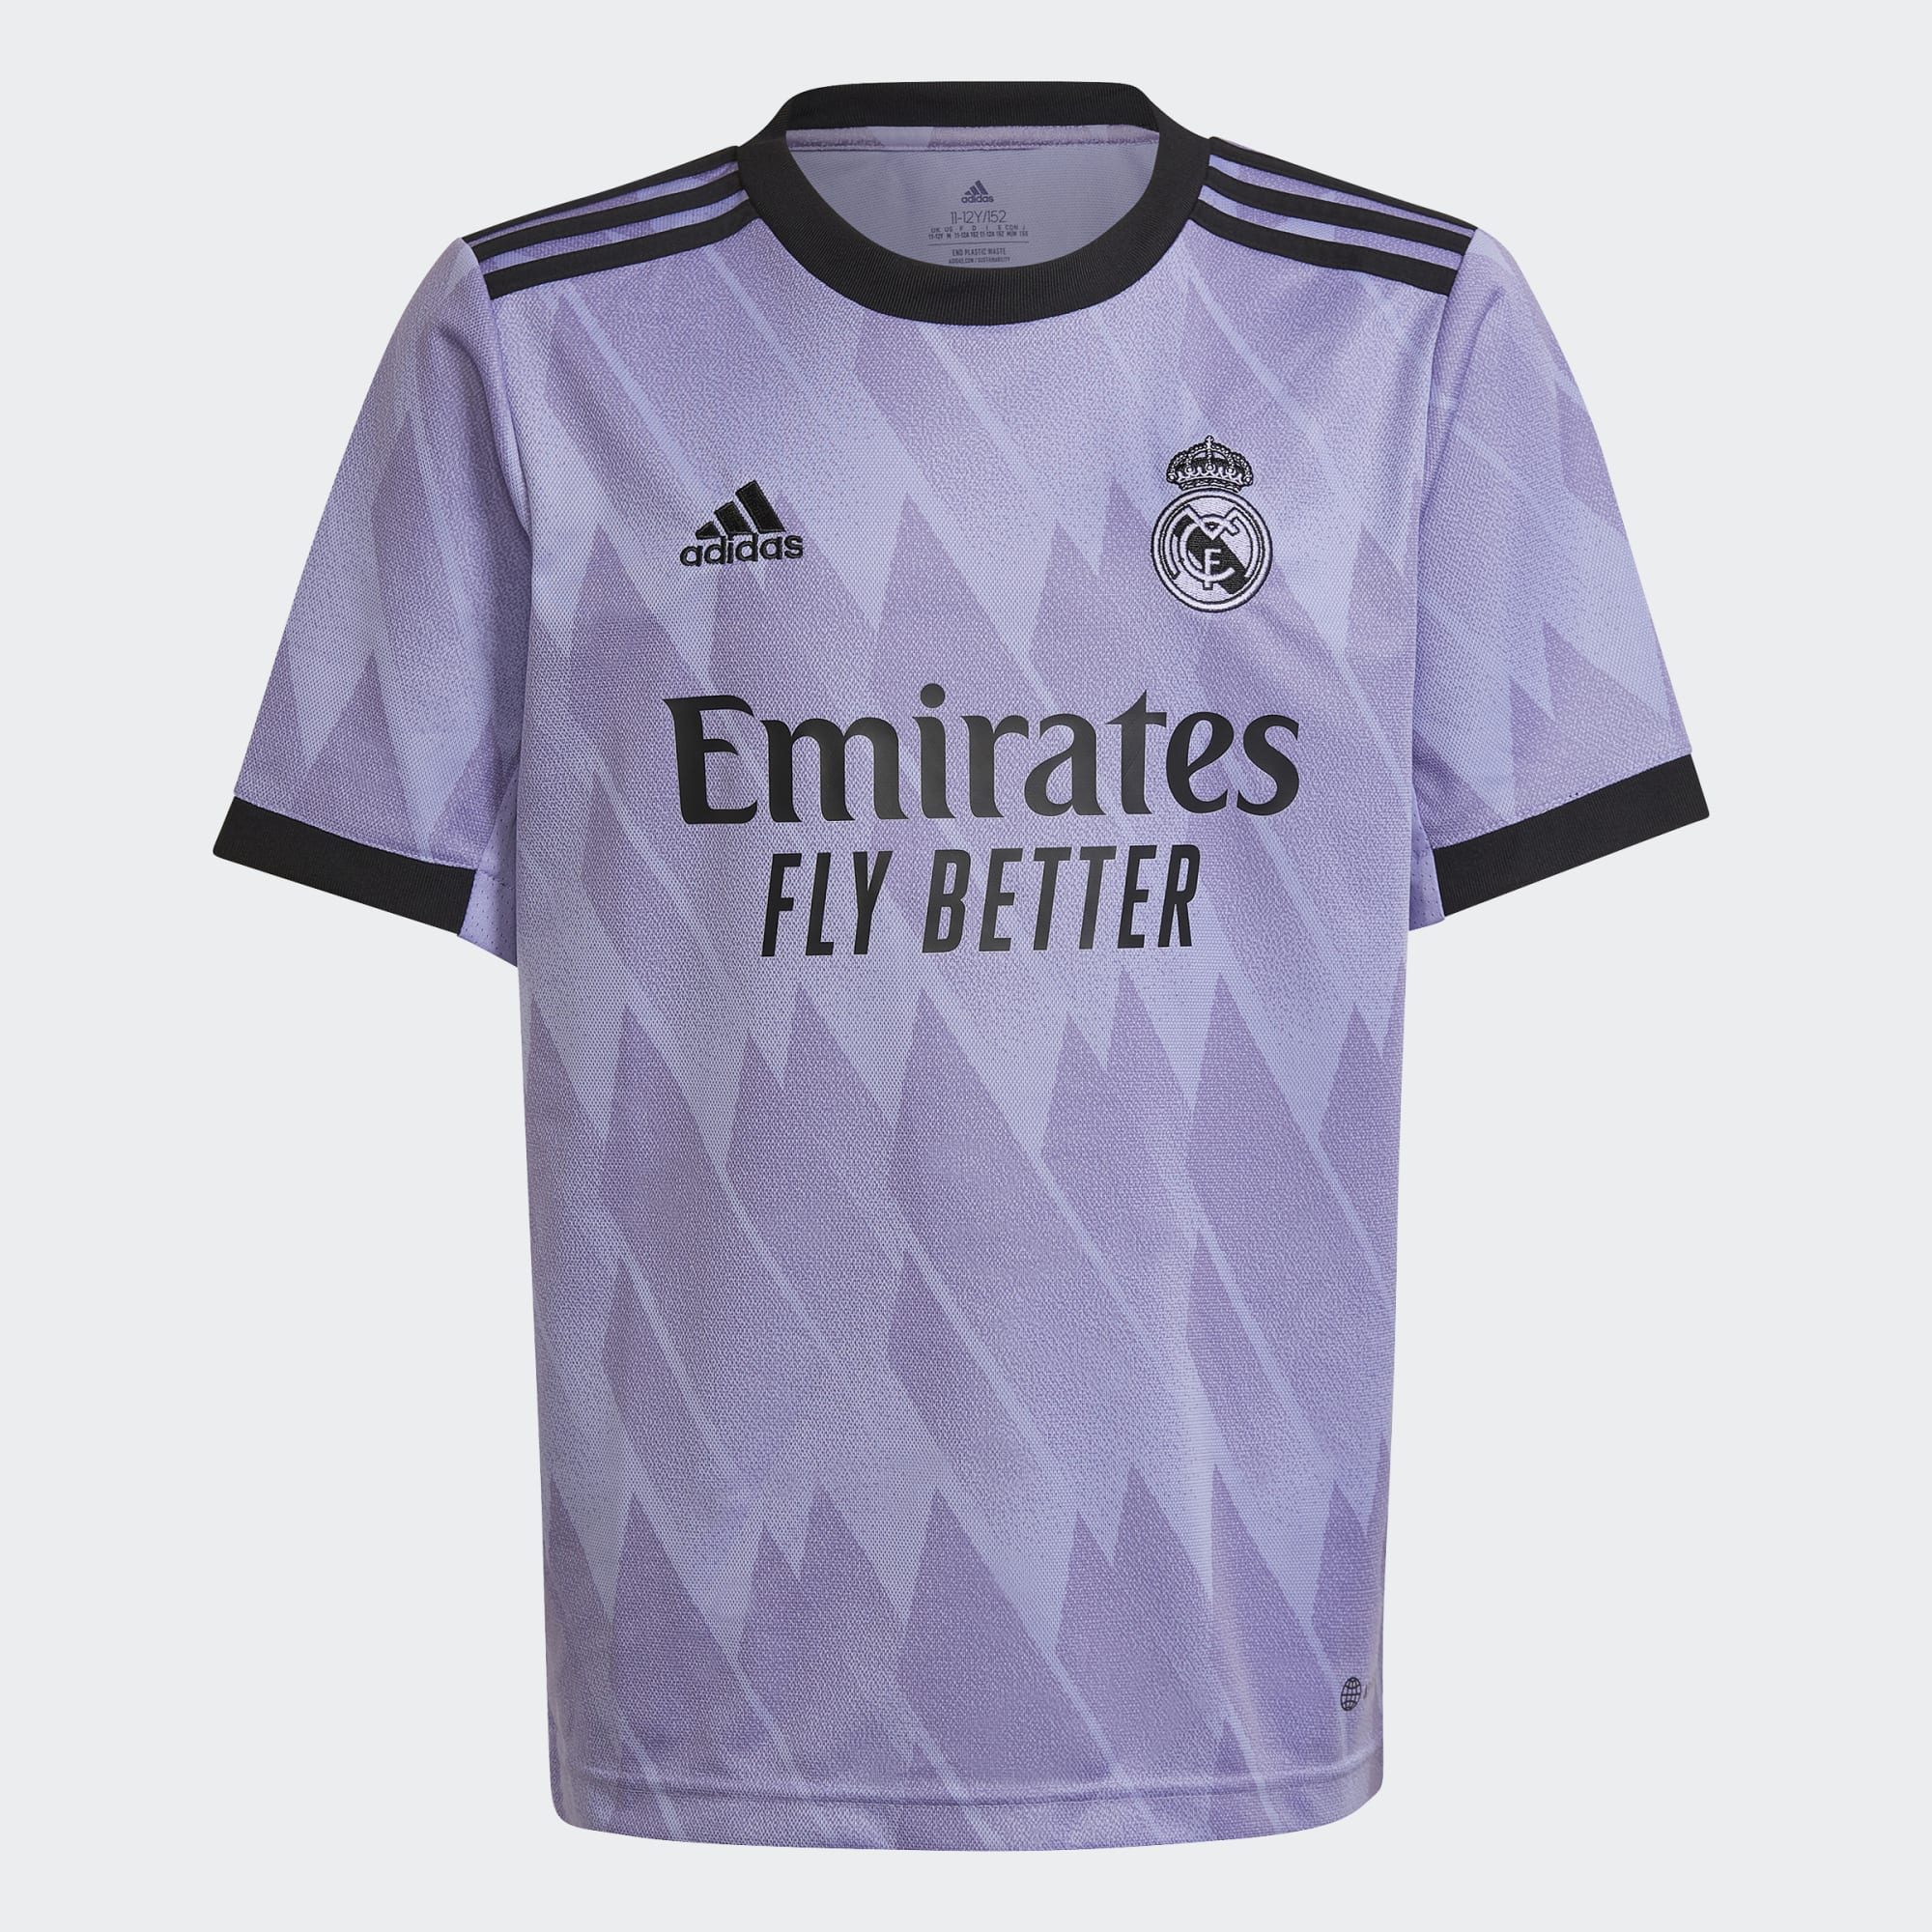 IJver Aanpassing rietje stefanssoccer.com:adidas Youth Real Madrid 22/23 Away Jersey - Light Purple